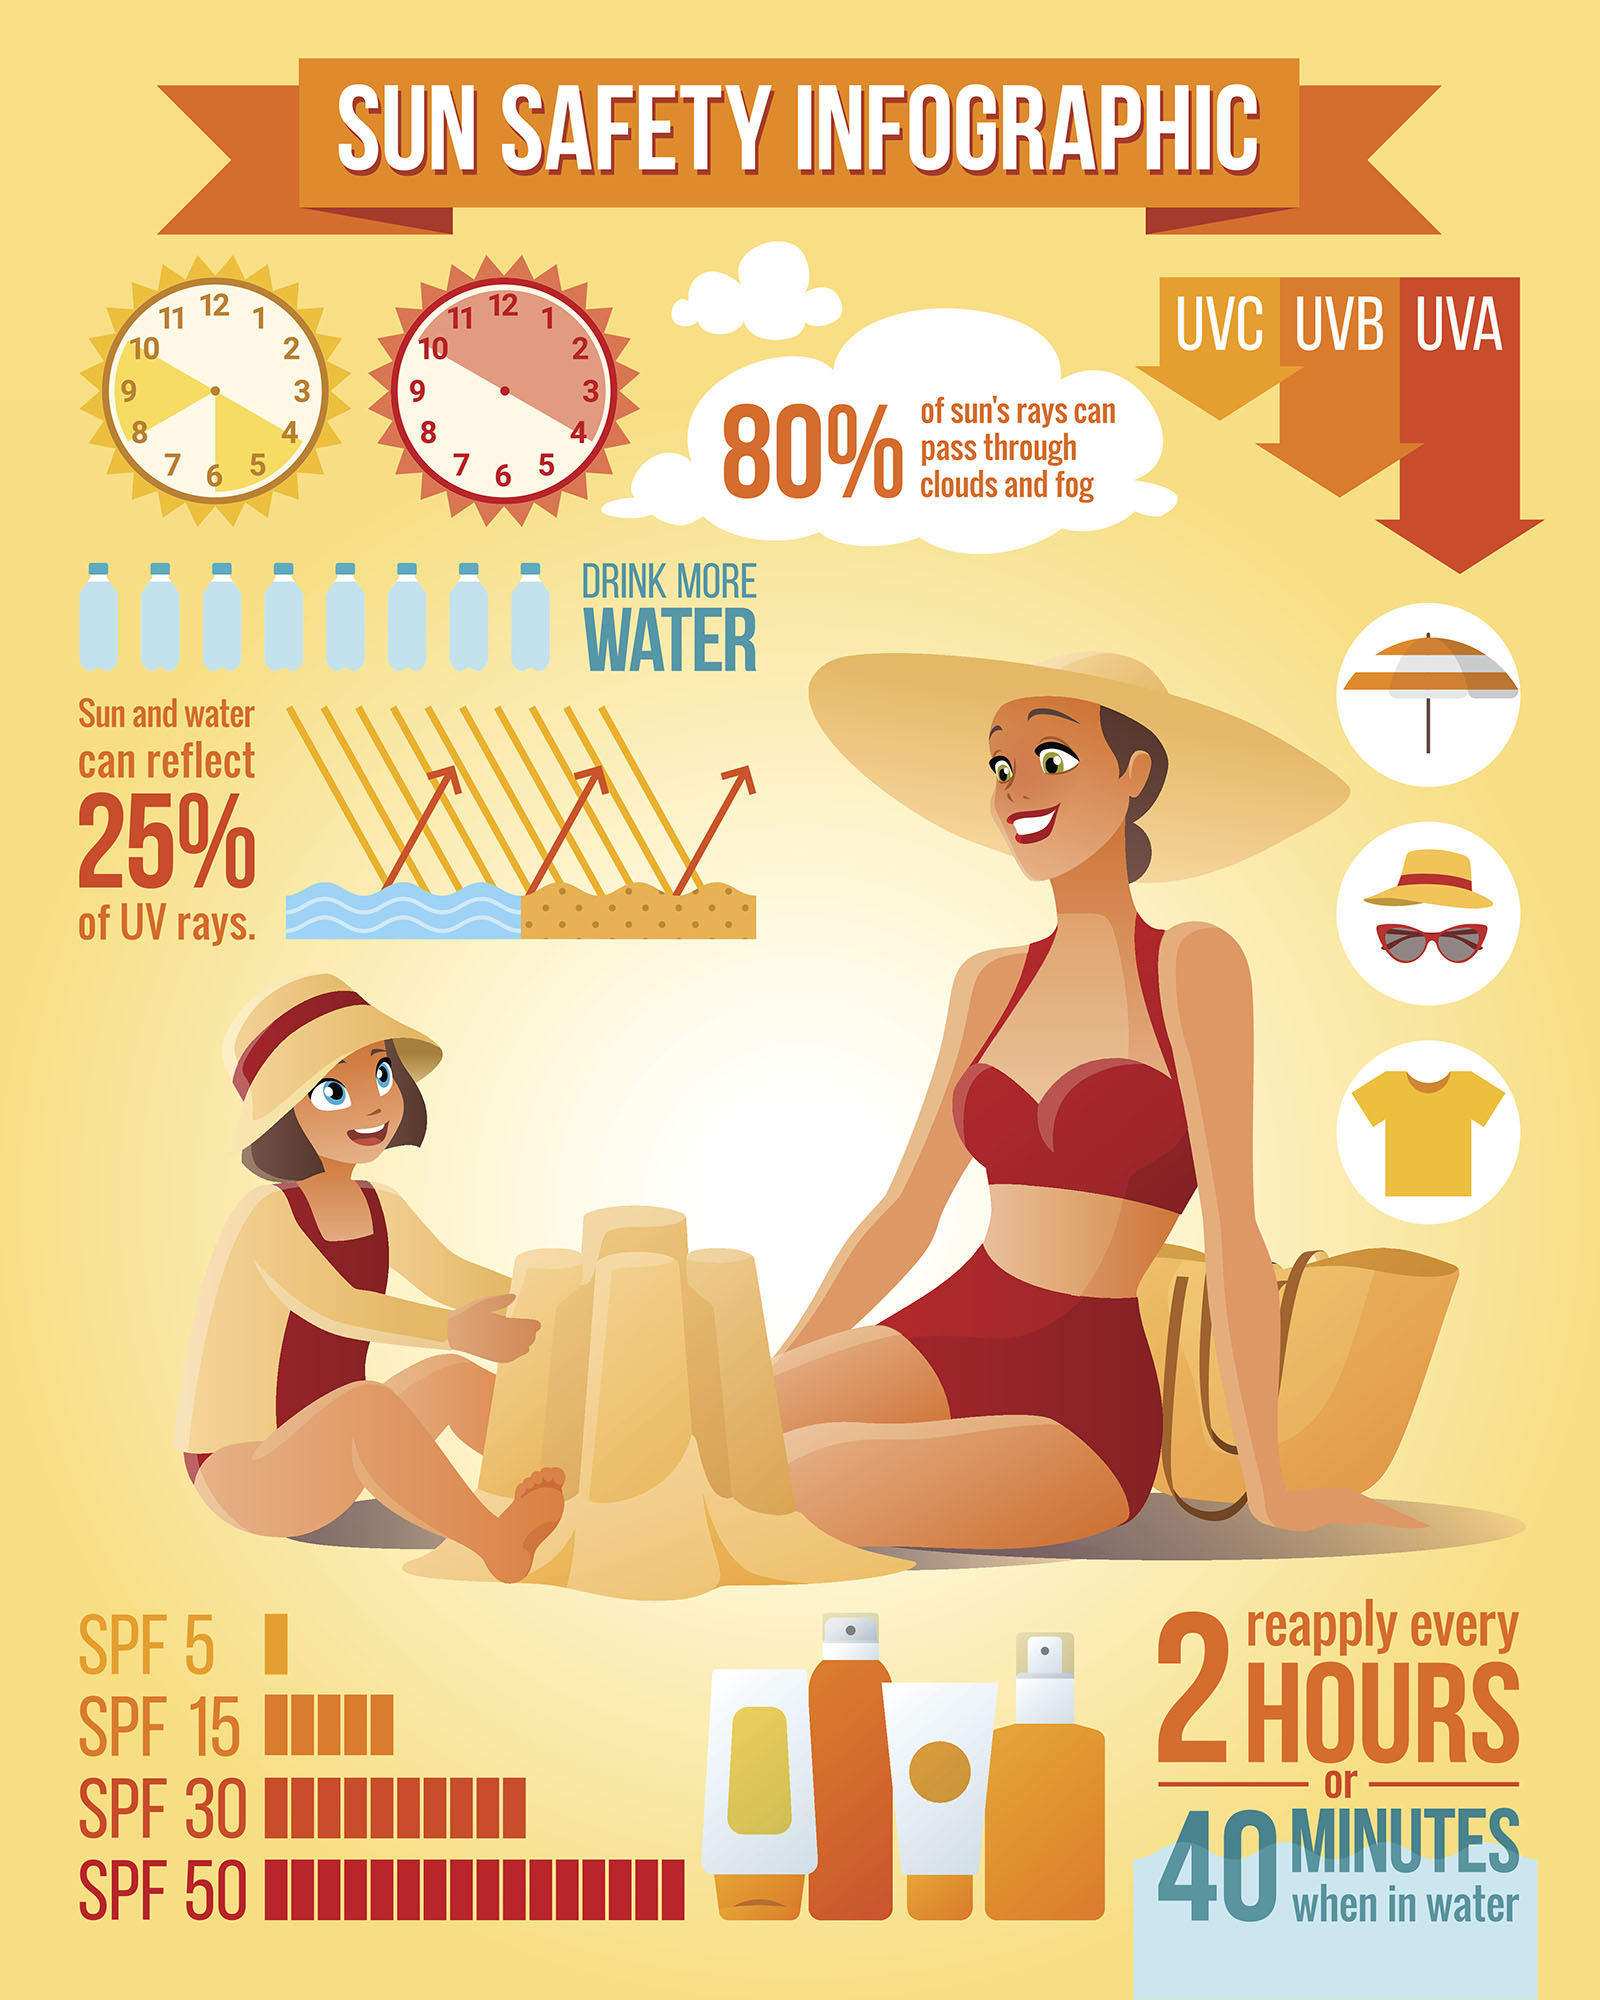 importance of sunscreen